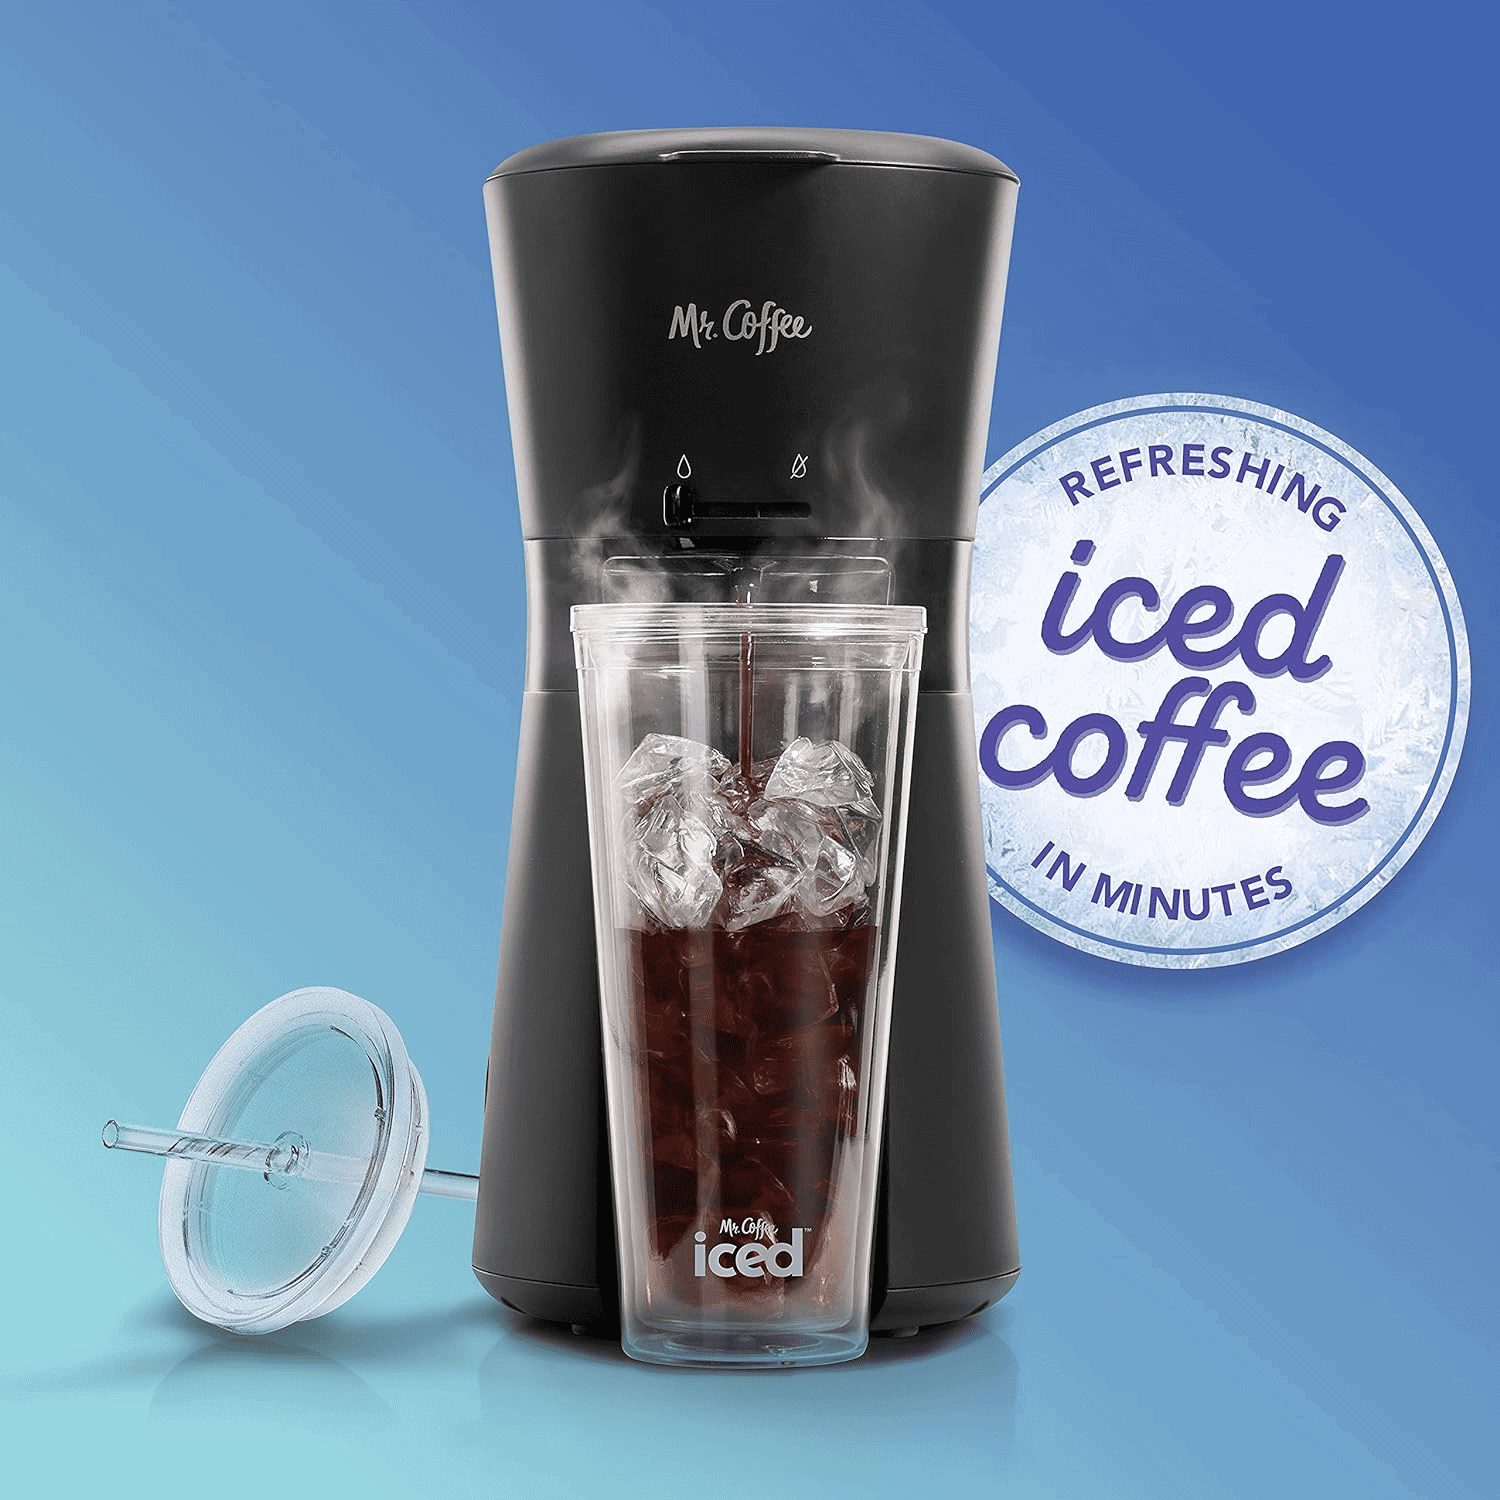 Mr. Coffee Iced Coffee Maker, coffee maker with reusable tumbler, reusable tumbler and coffee, coffee filter